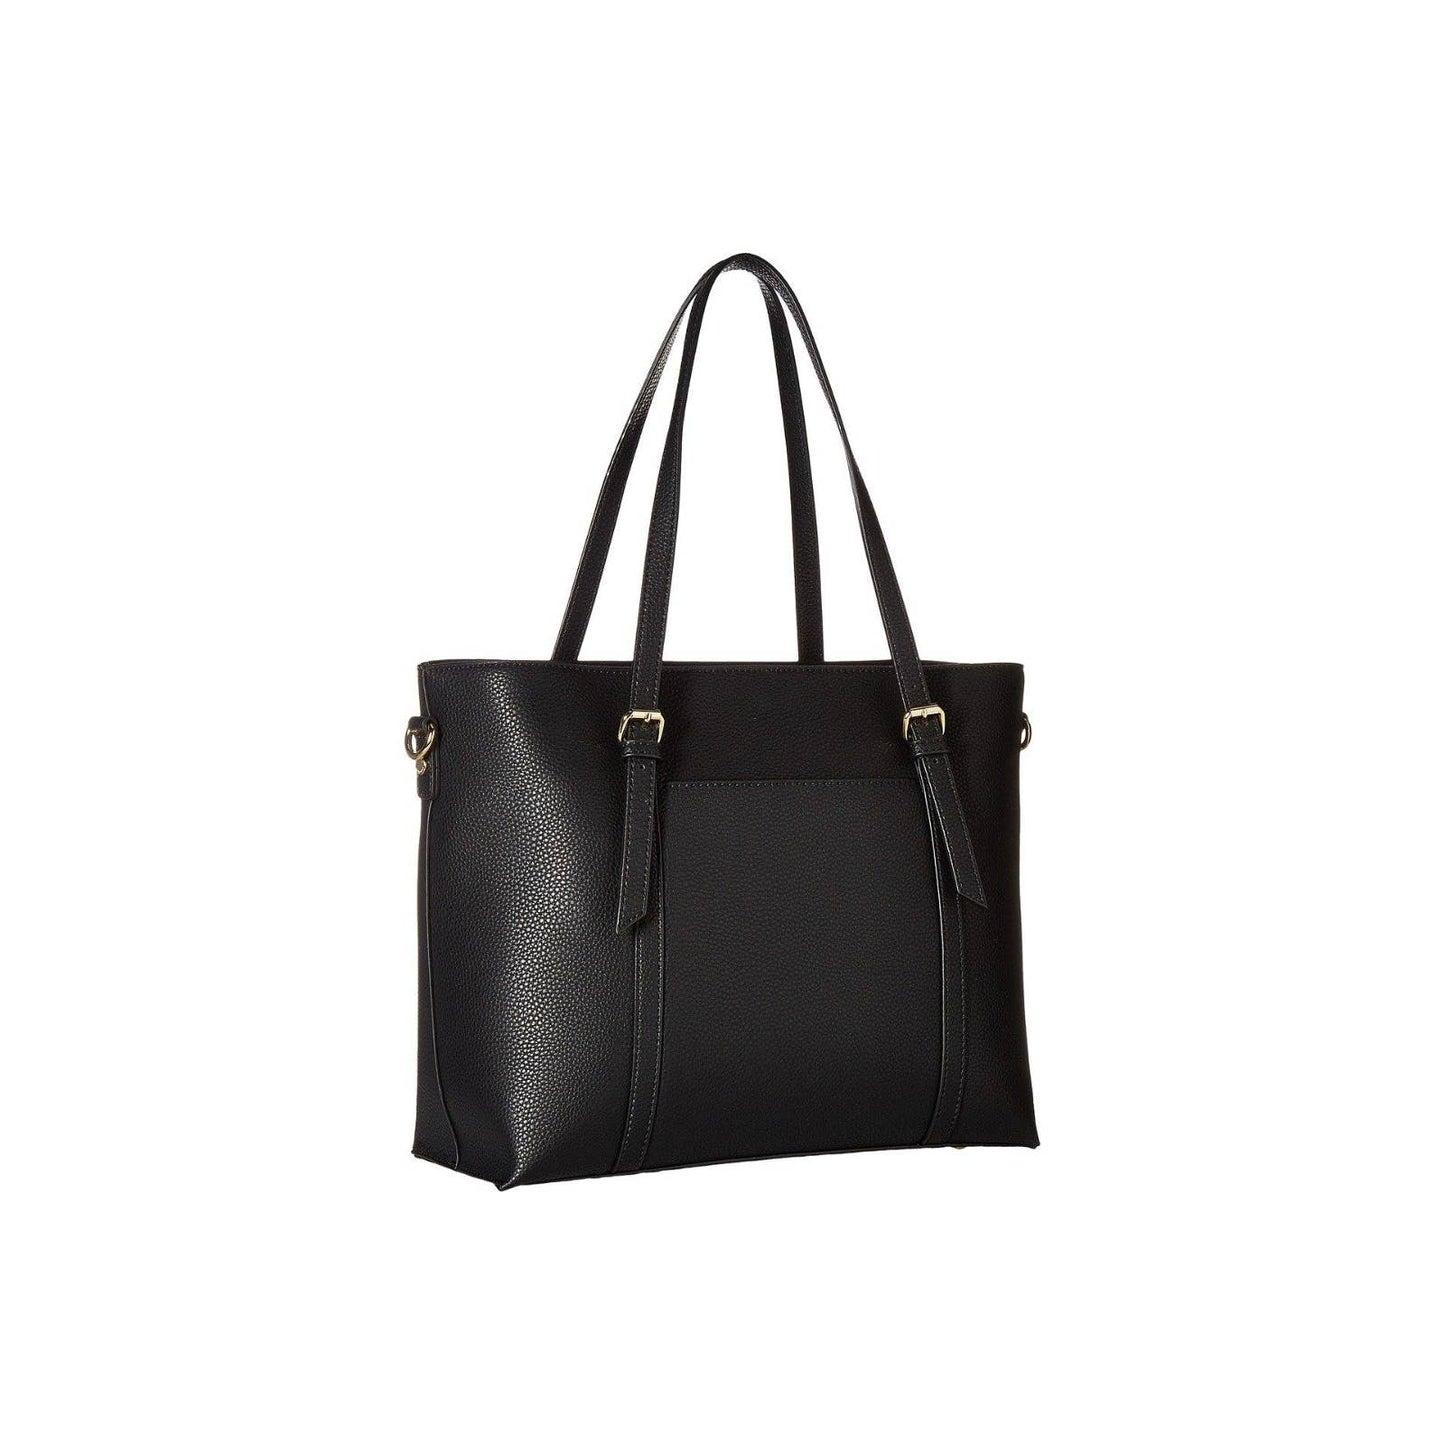 CALVIN KLEIN PYC EAST WEST LEATHER TOTE DOUBLE STRAP, BLACK SILVER